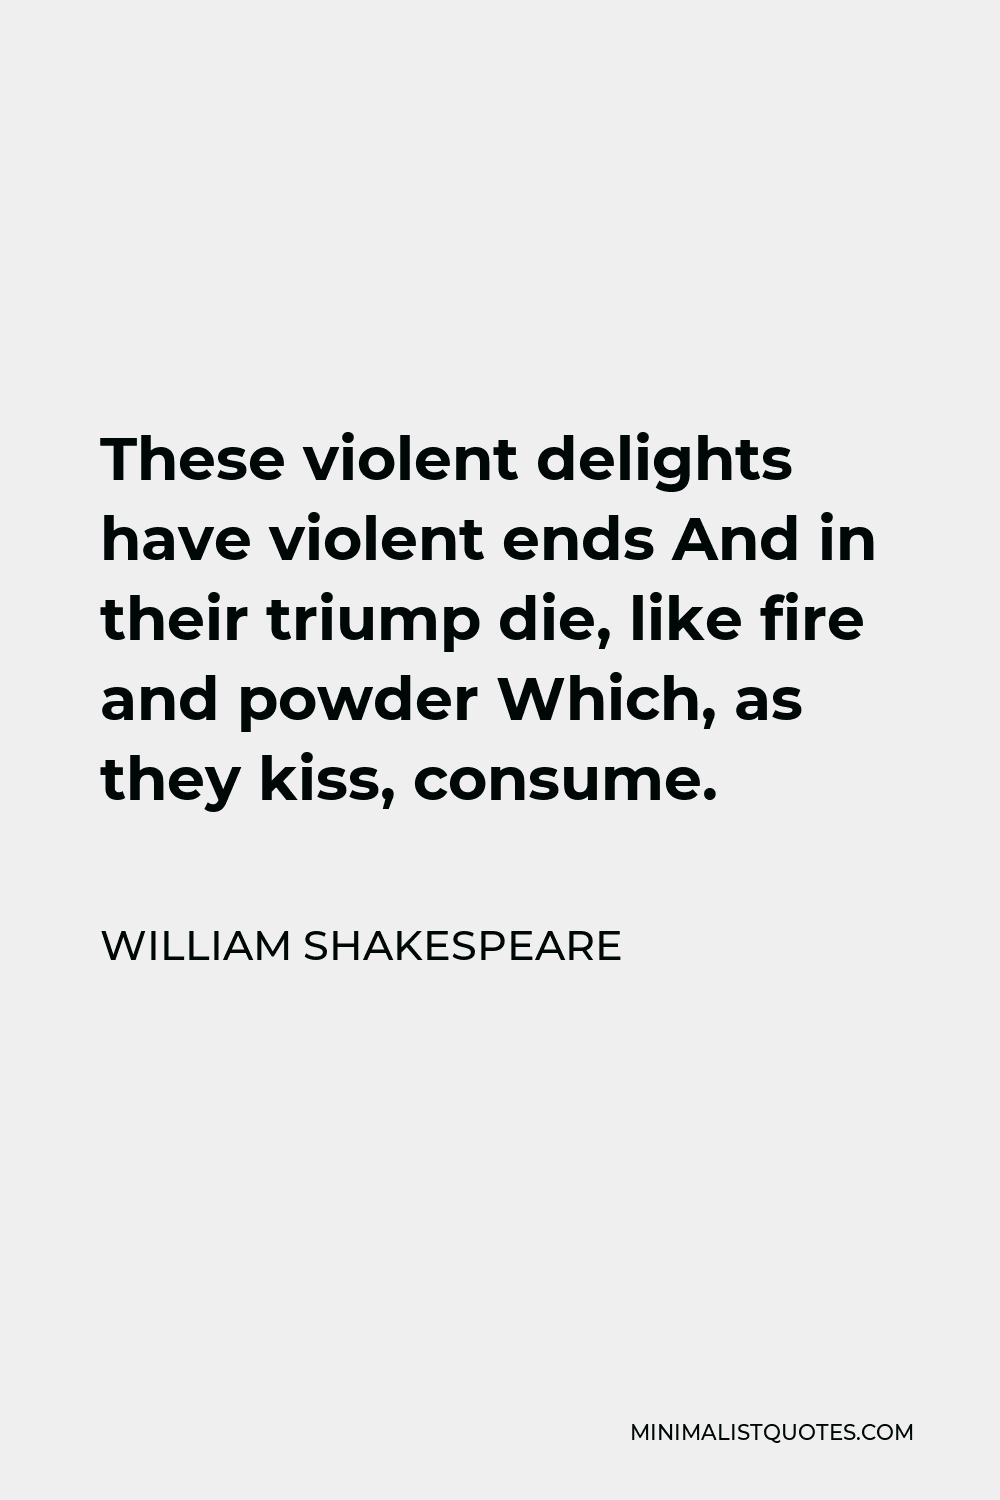 William Shakespeare Quote - These violent delights have violent ends And in their triump die, like fire and powder Which, as they kiss, consume.